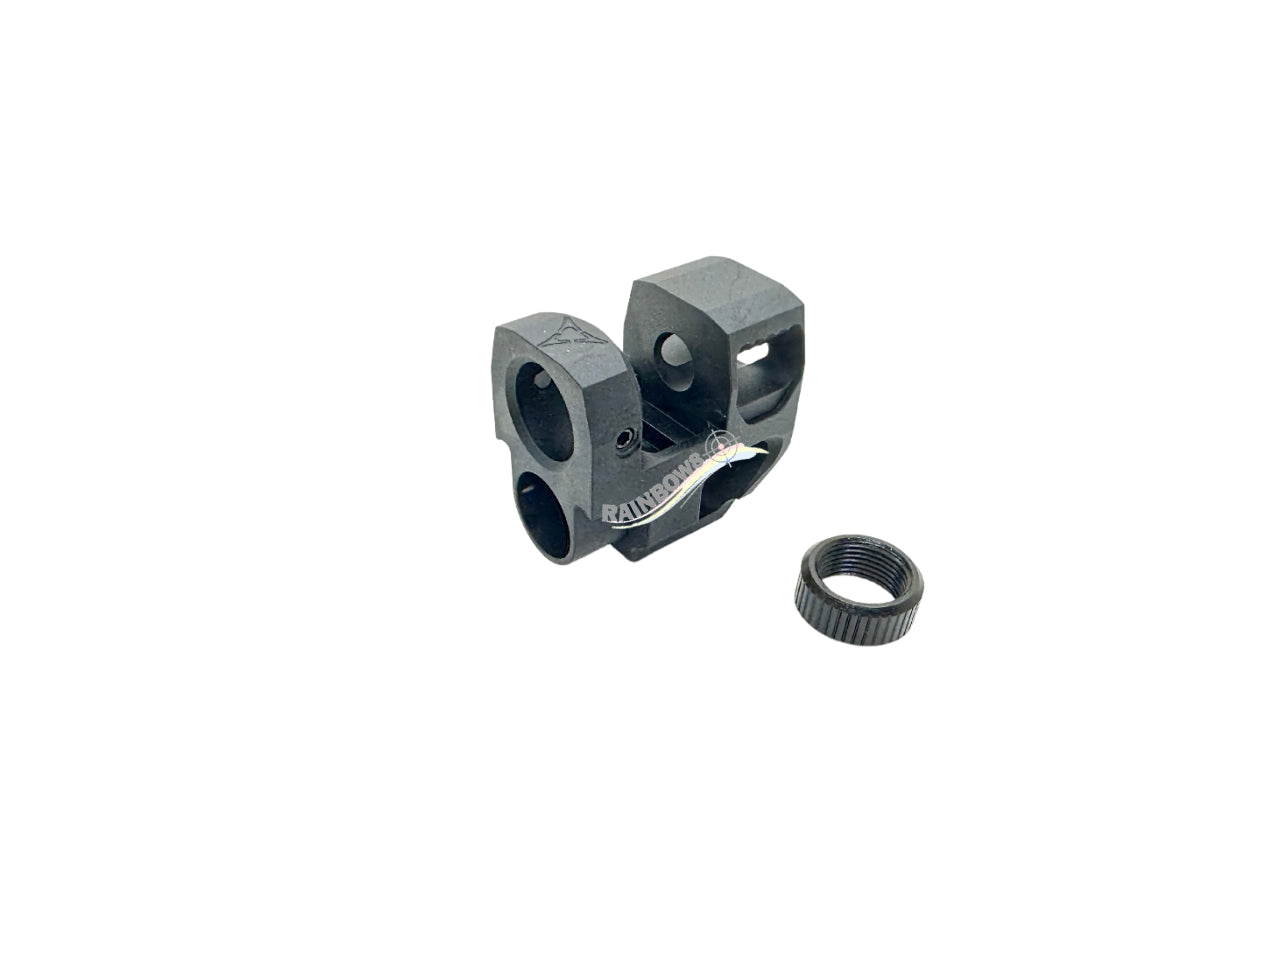 Pro Arms Killer Style 14mm- Compensator for VFC M17 / M18